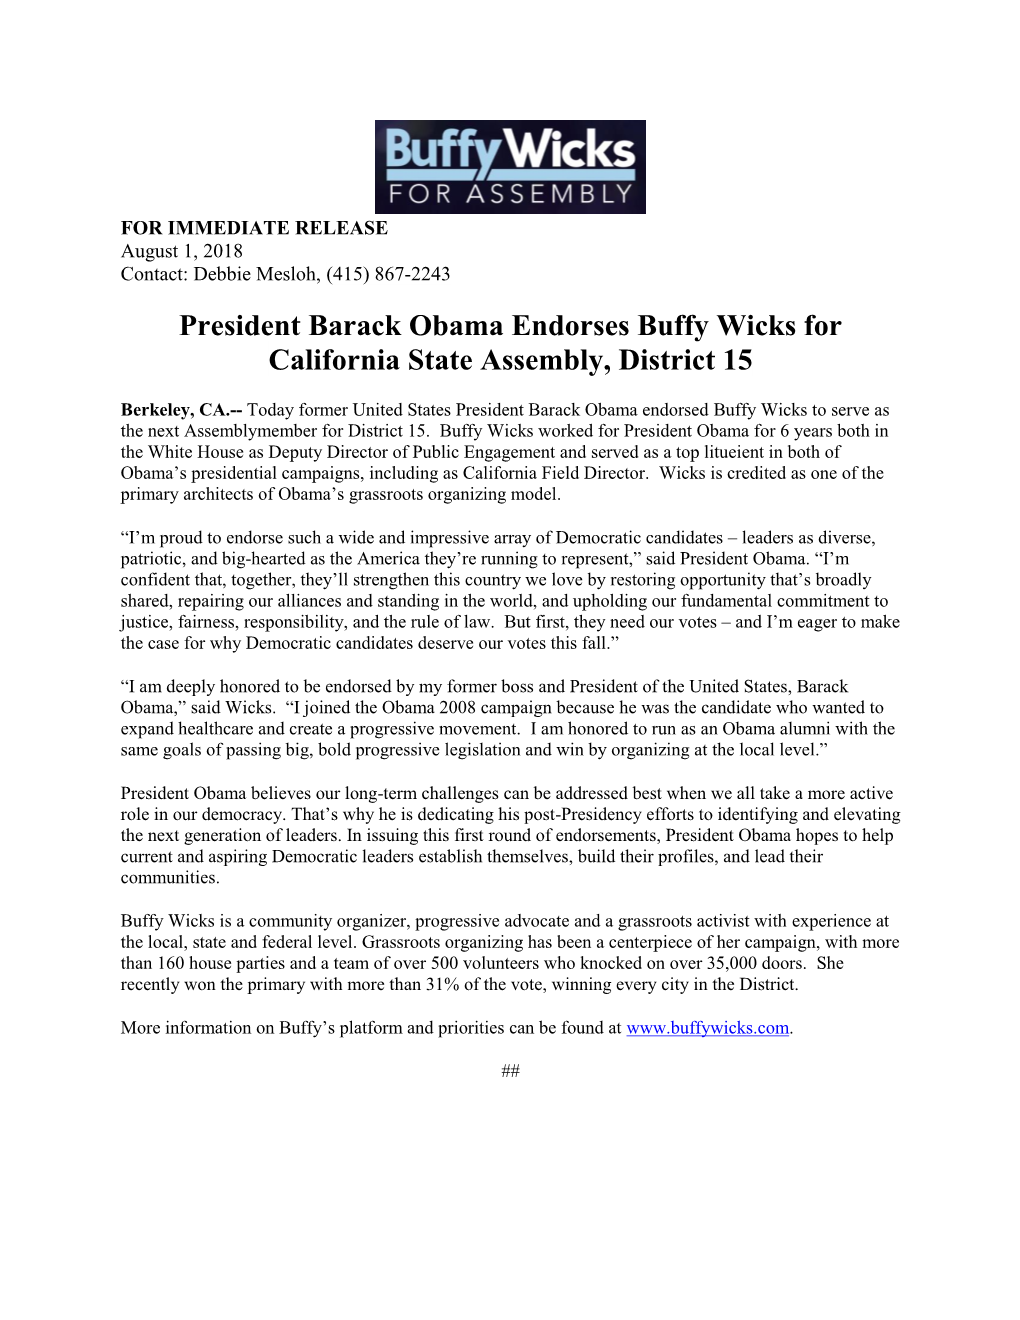 President Barack Obama Endorses Buffy Wicks for California State Assembly, District 15